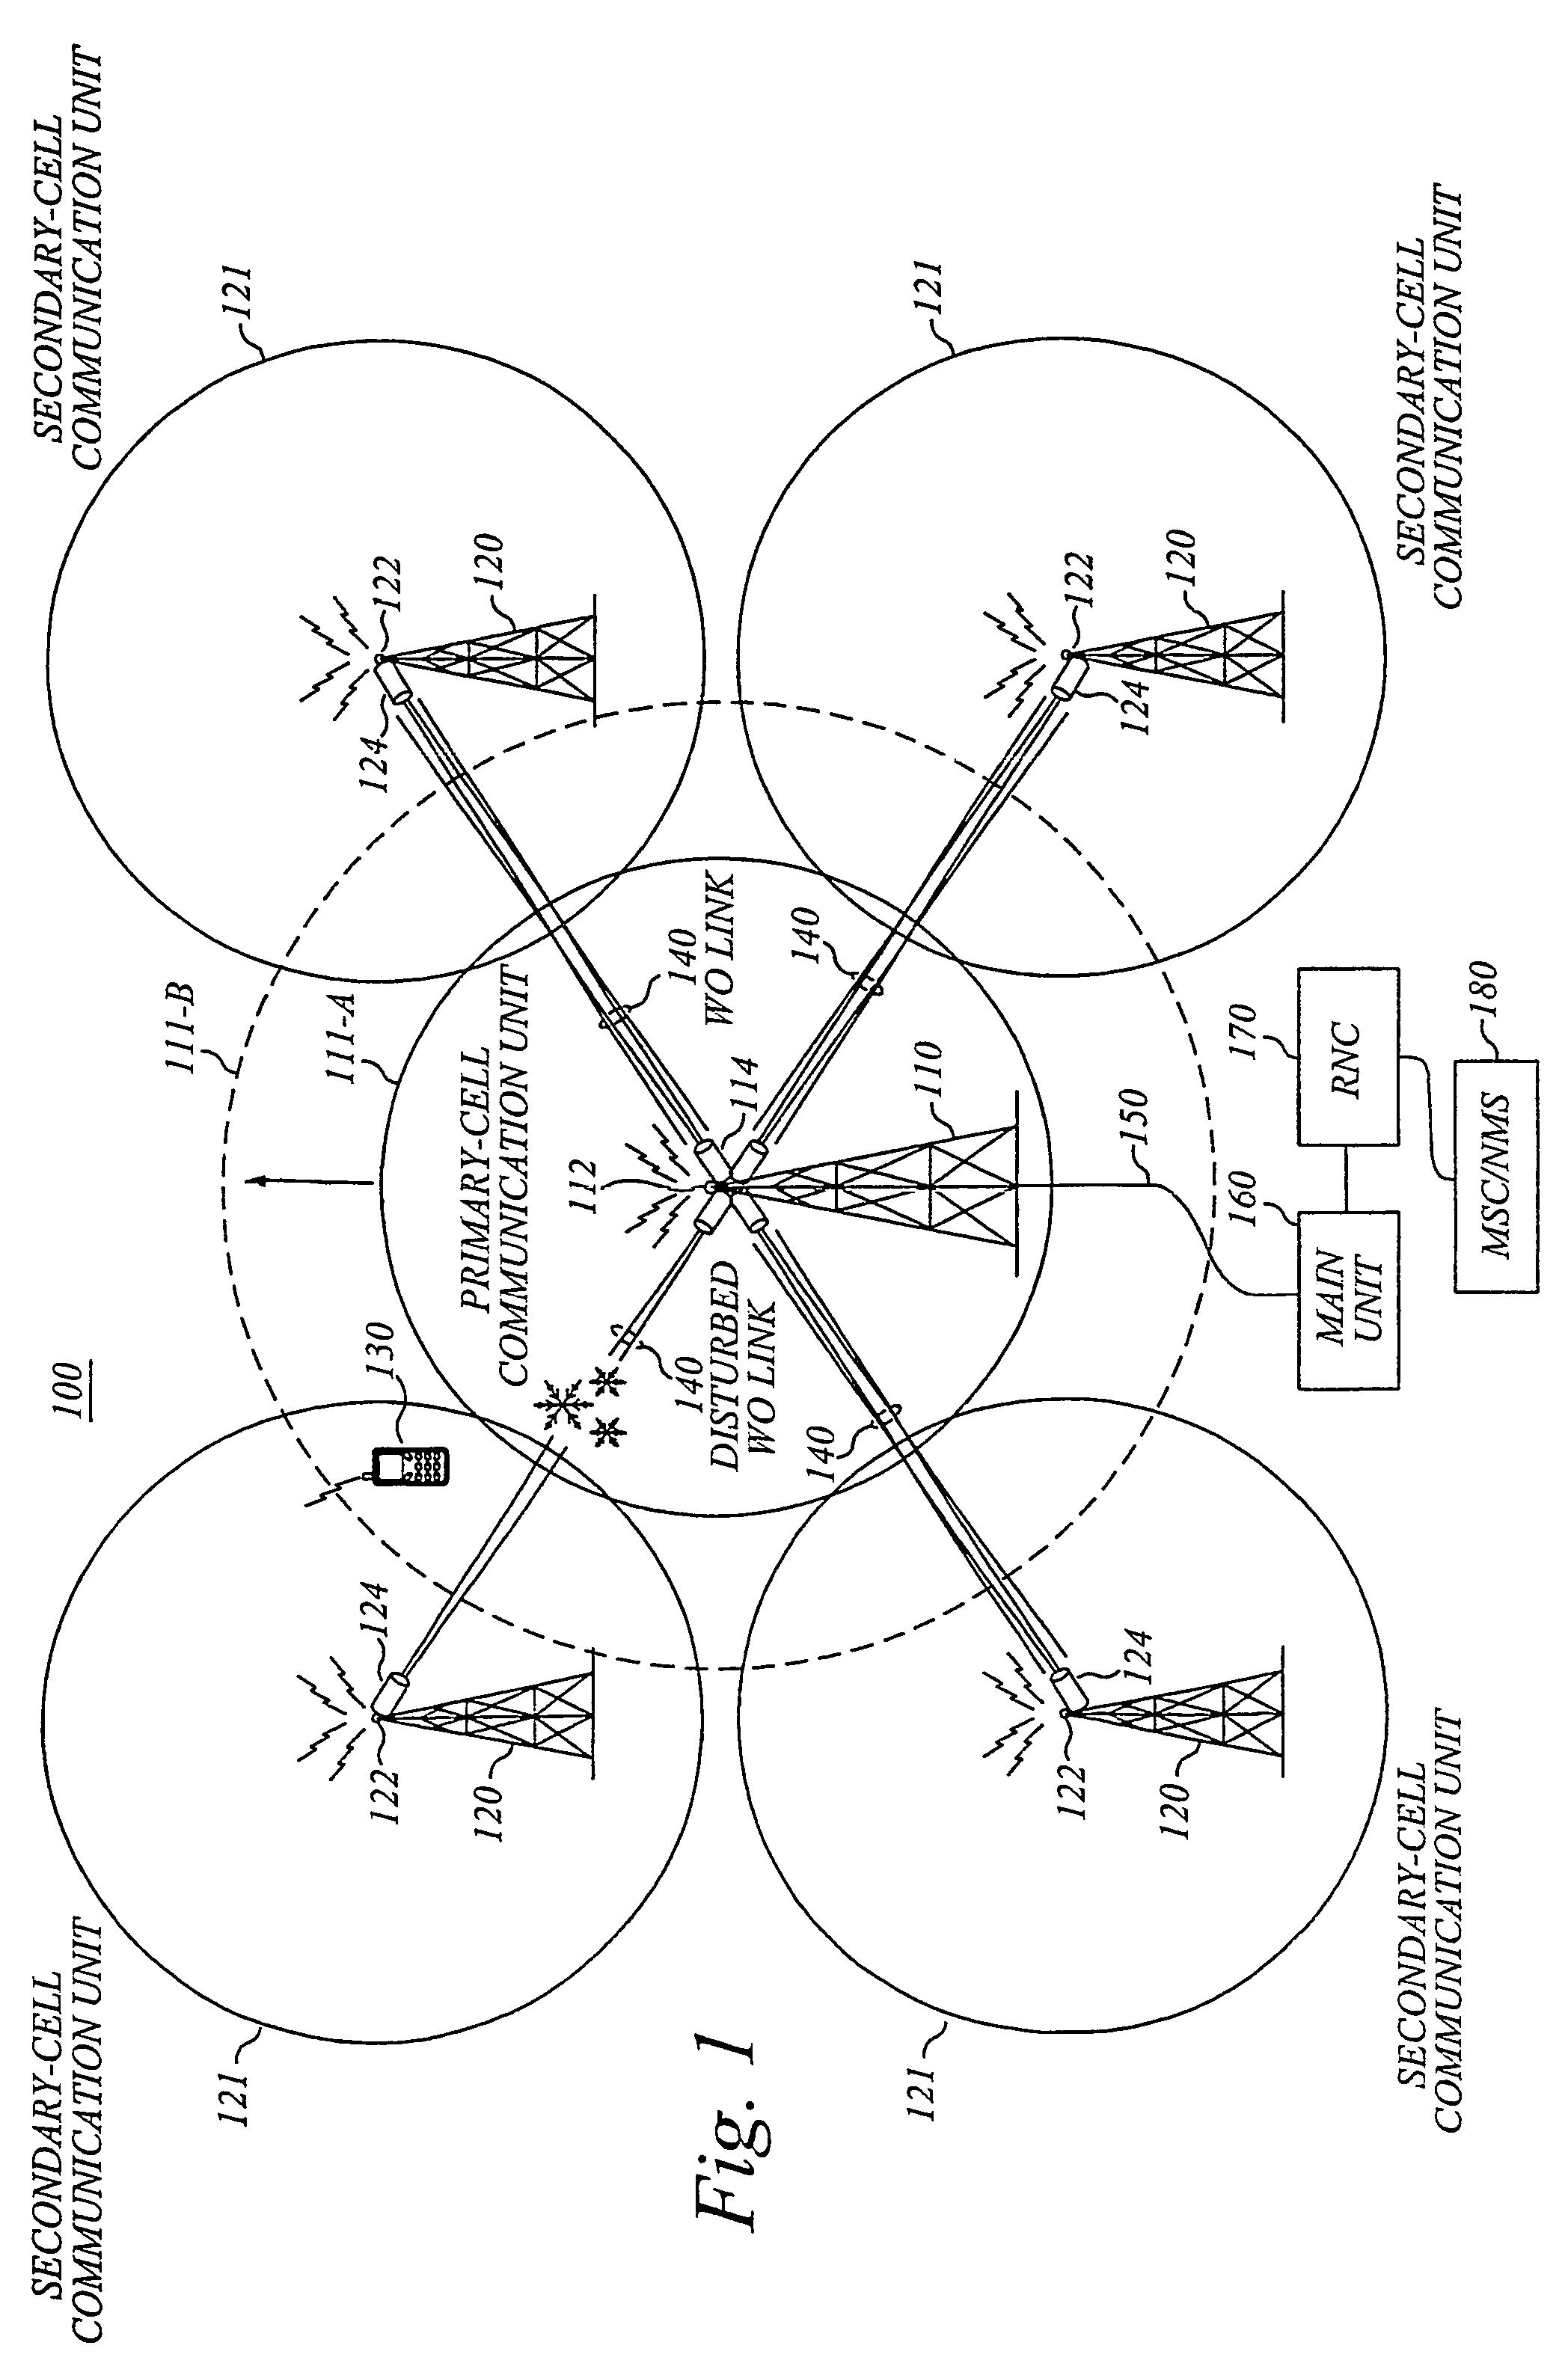 Cellular communications system employing wireless optical links